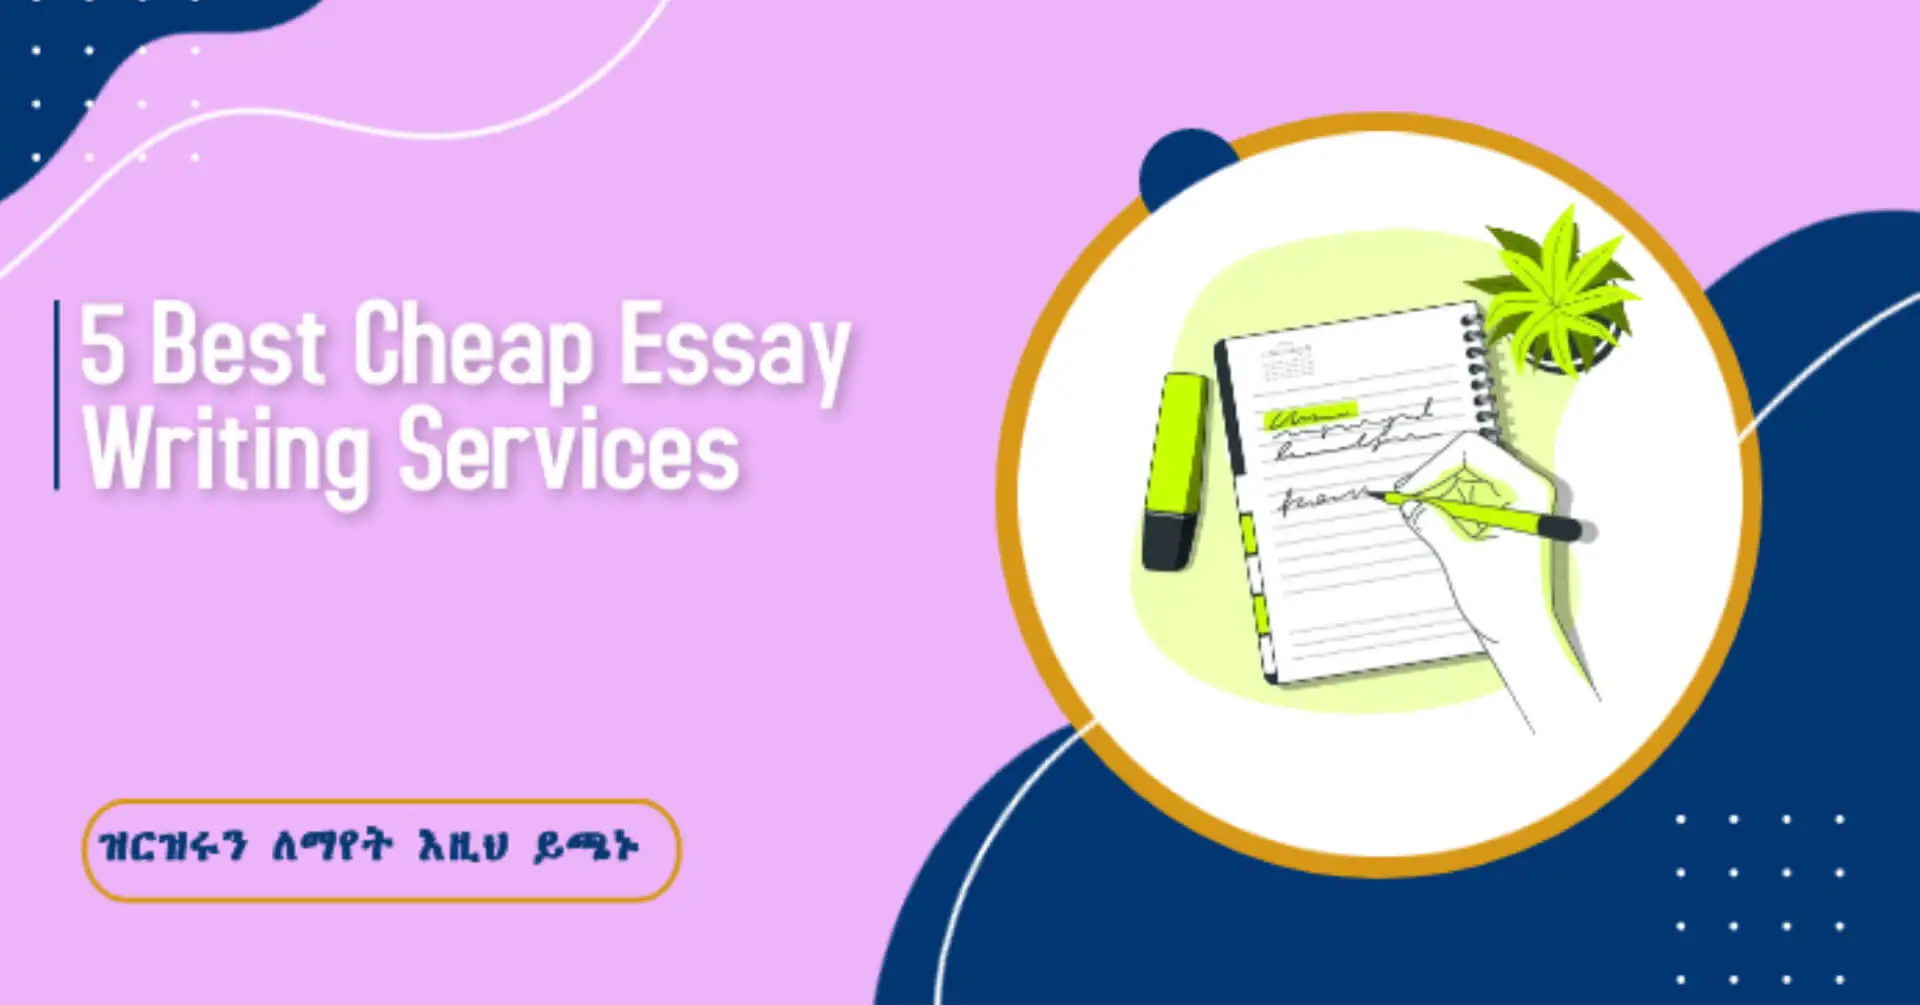 essay writing service cheapest